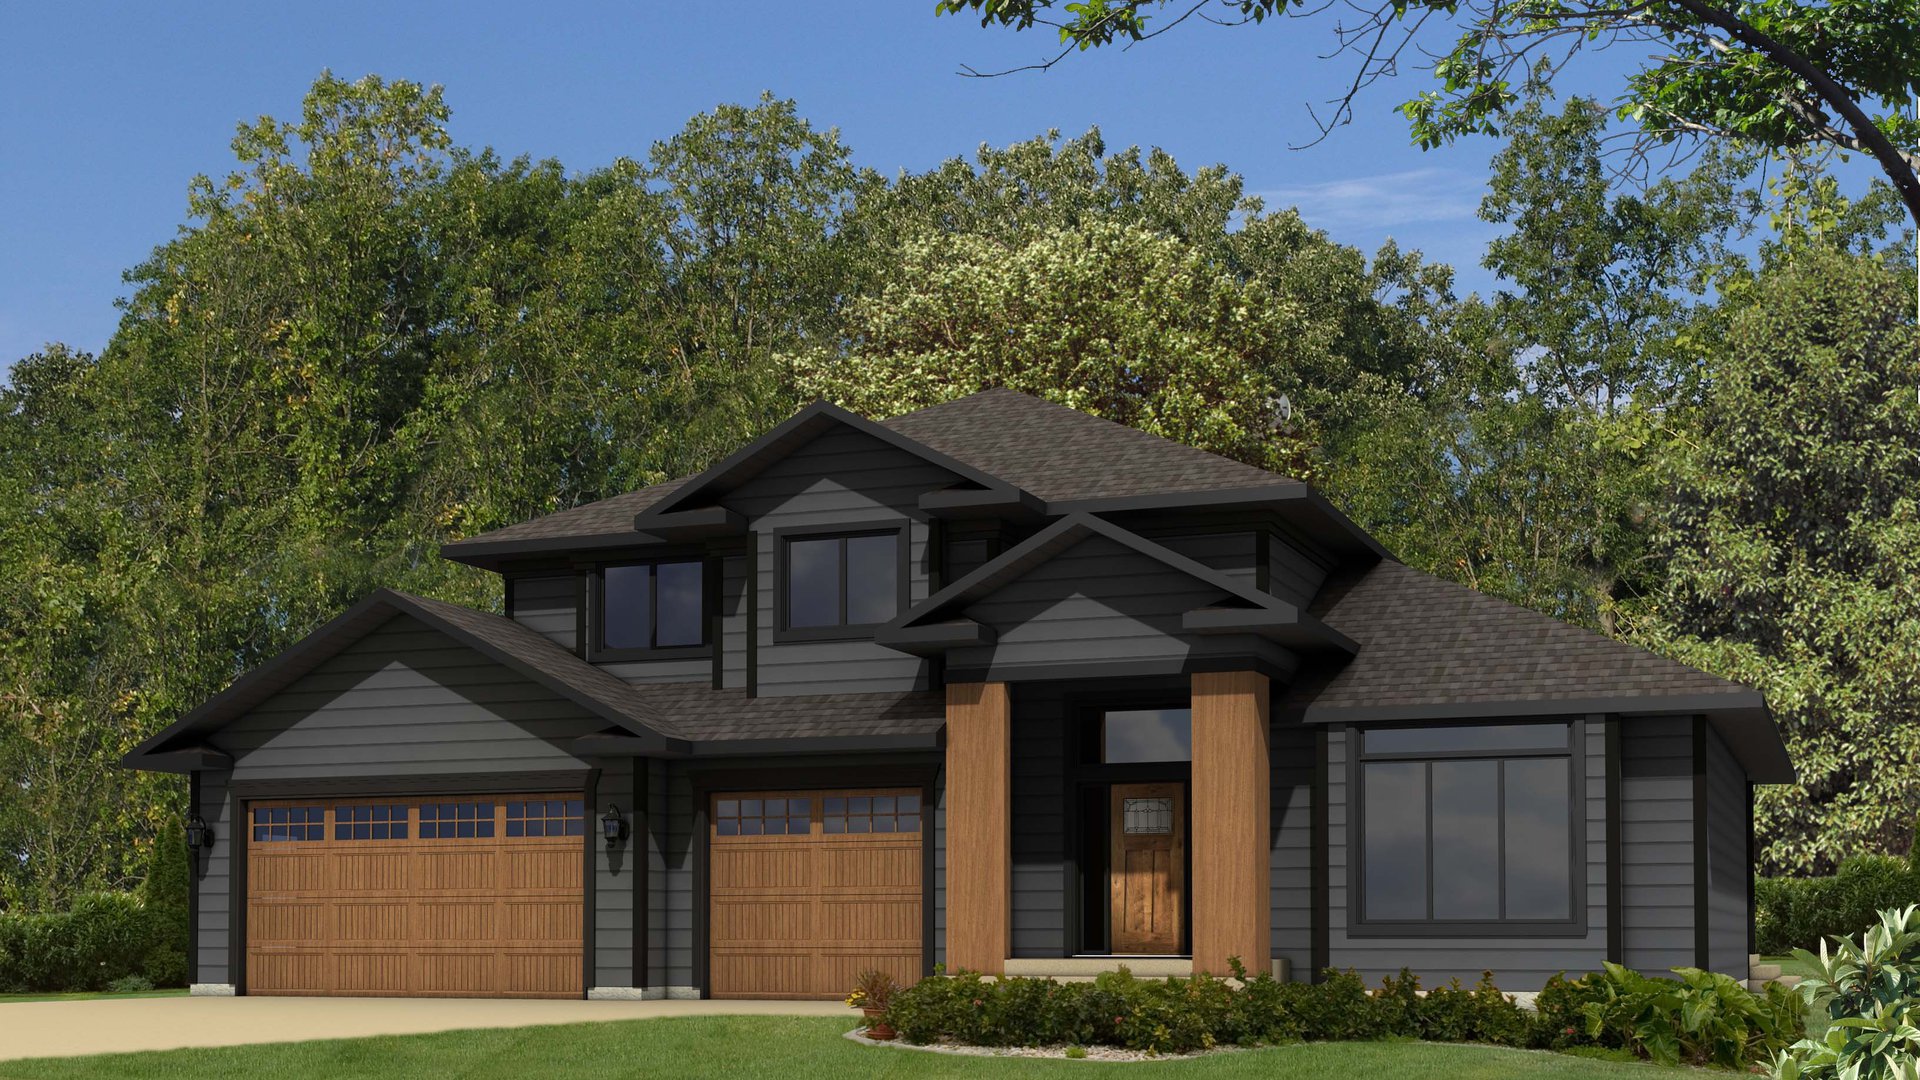 Winston house plan modular homes nelson homes ready to move homes prefabricated home packages.jpg